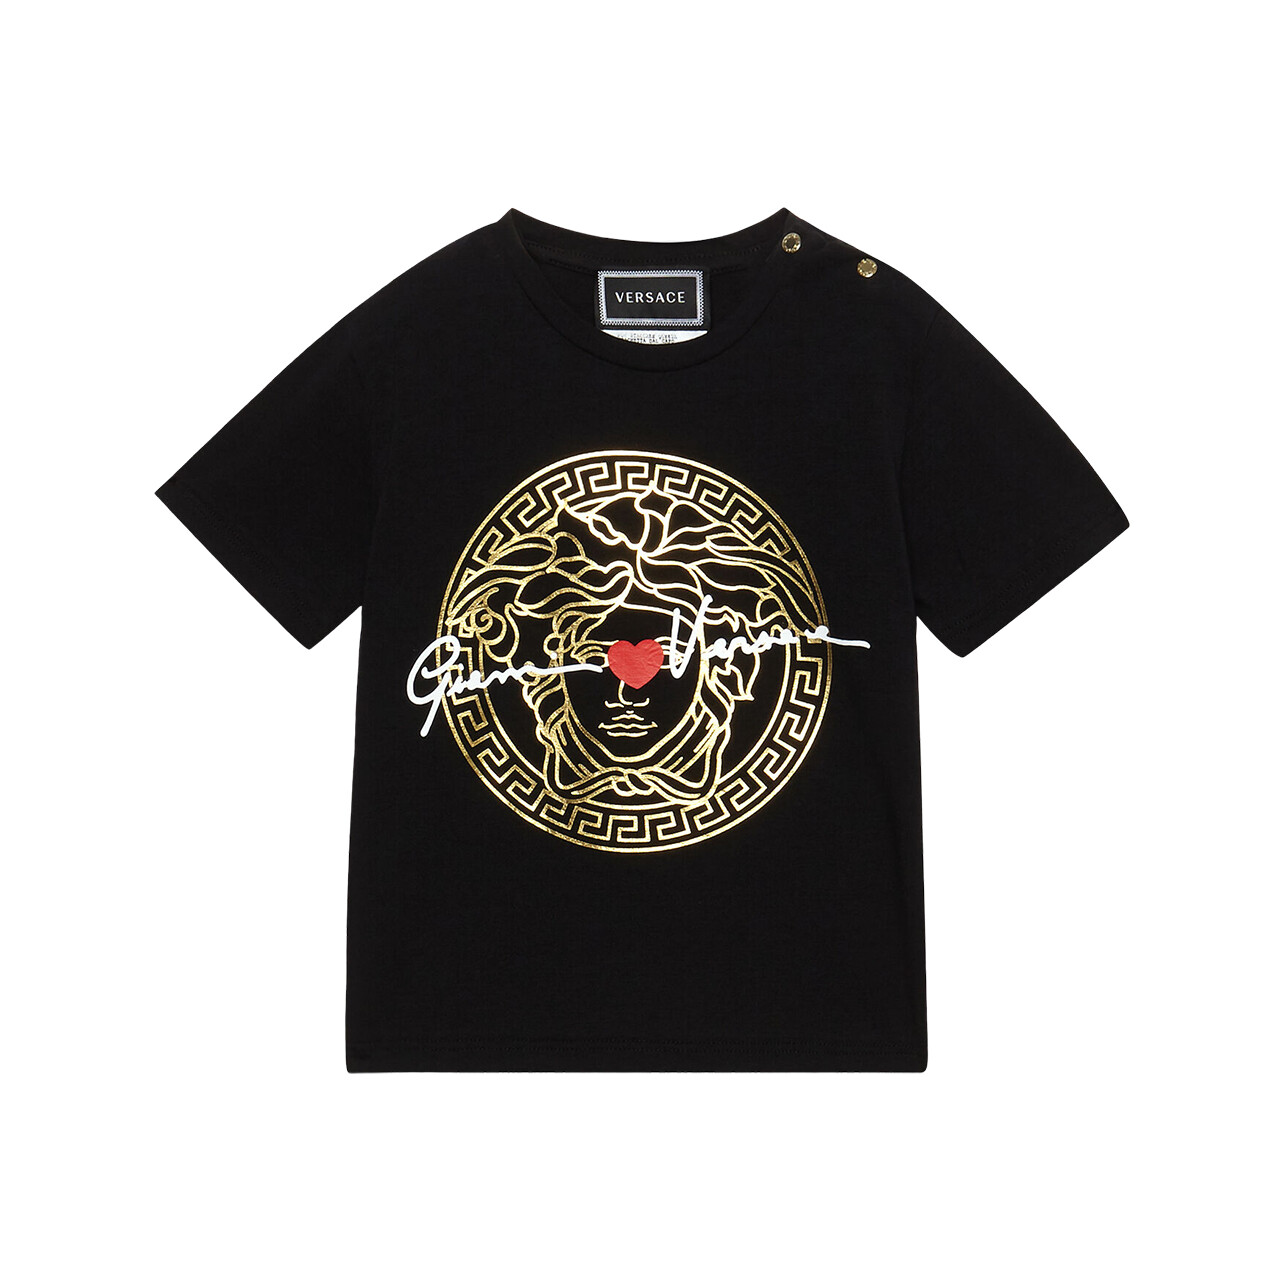 YOUNG VERSACE T-SHIRT – lestyle